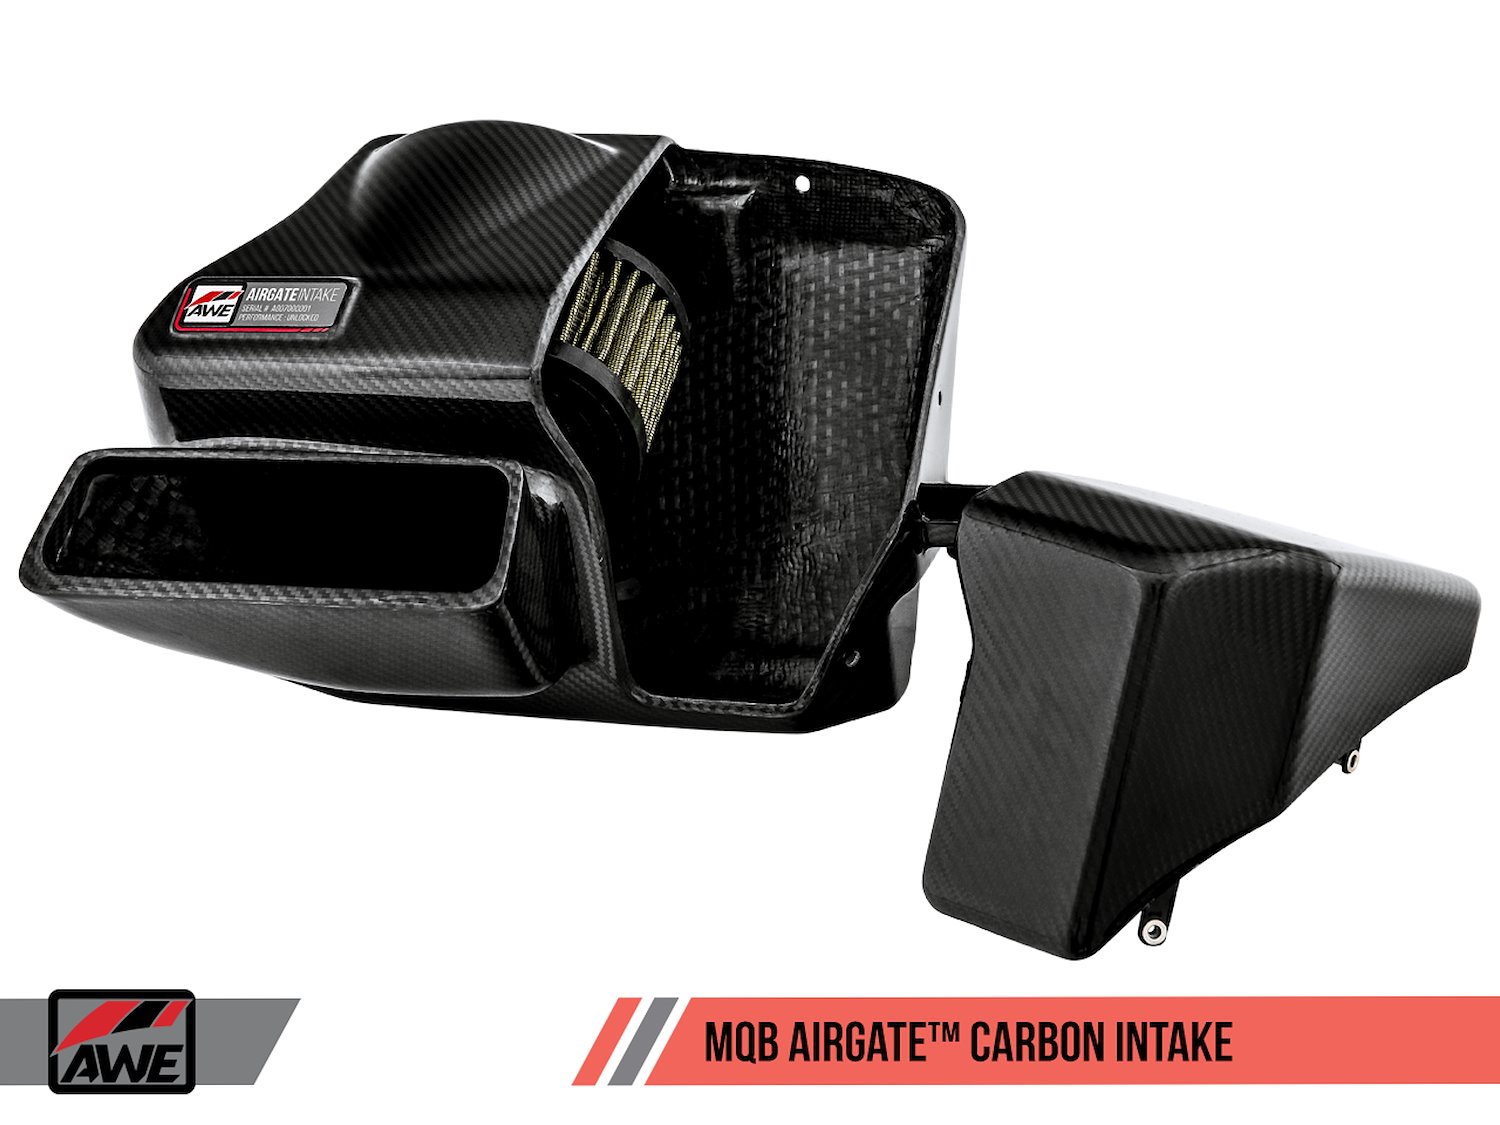 AirGate Carbon Intake for Audi / VW MQB (1.8T / 2.0T) - With Lid